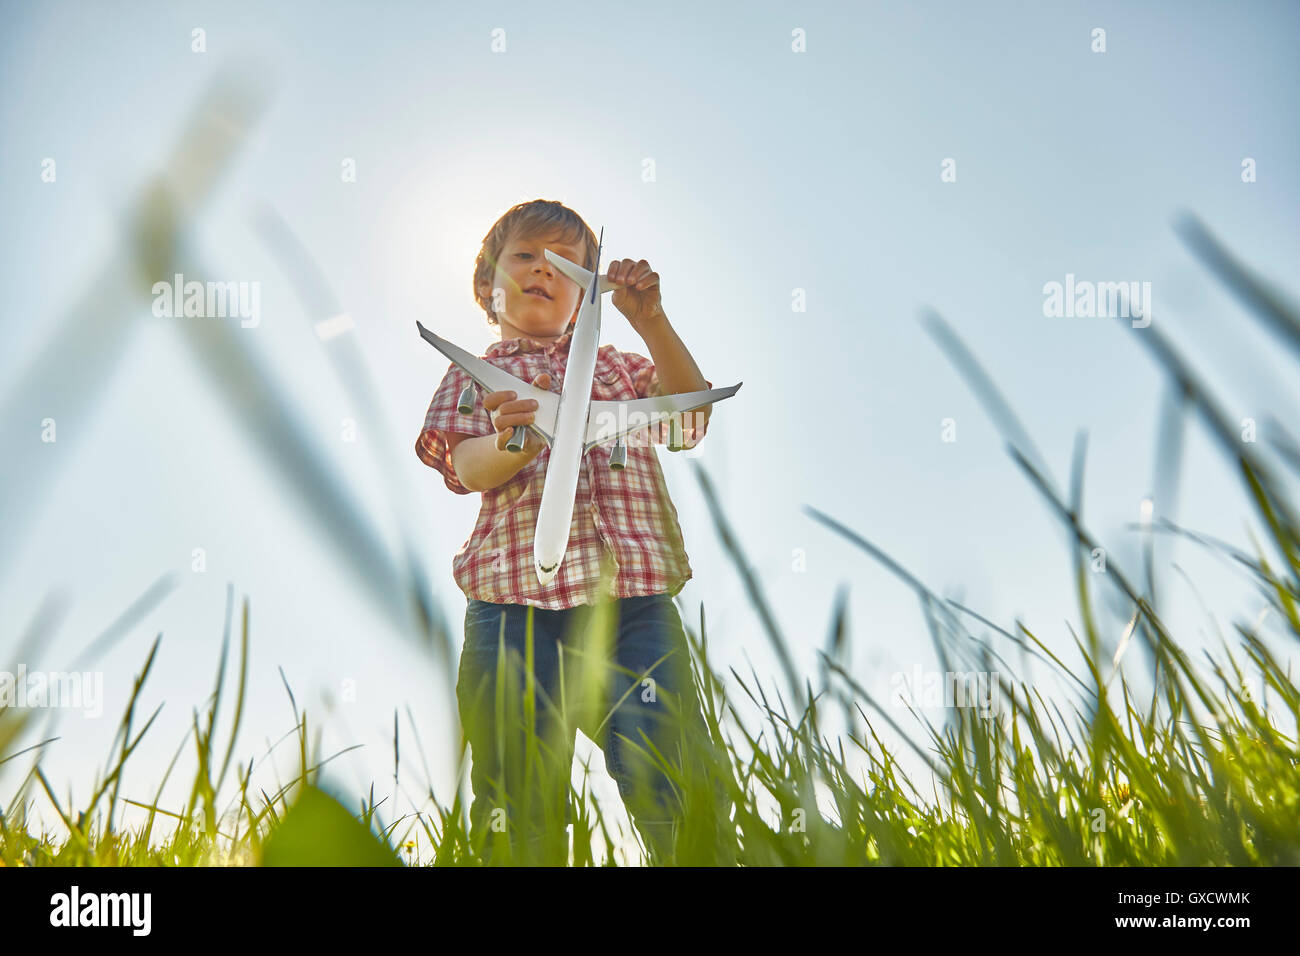 Low angle view of boy standing in grass contrôle de queue toy airplane Banque D'Images